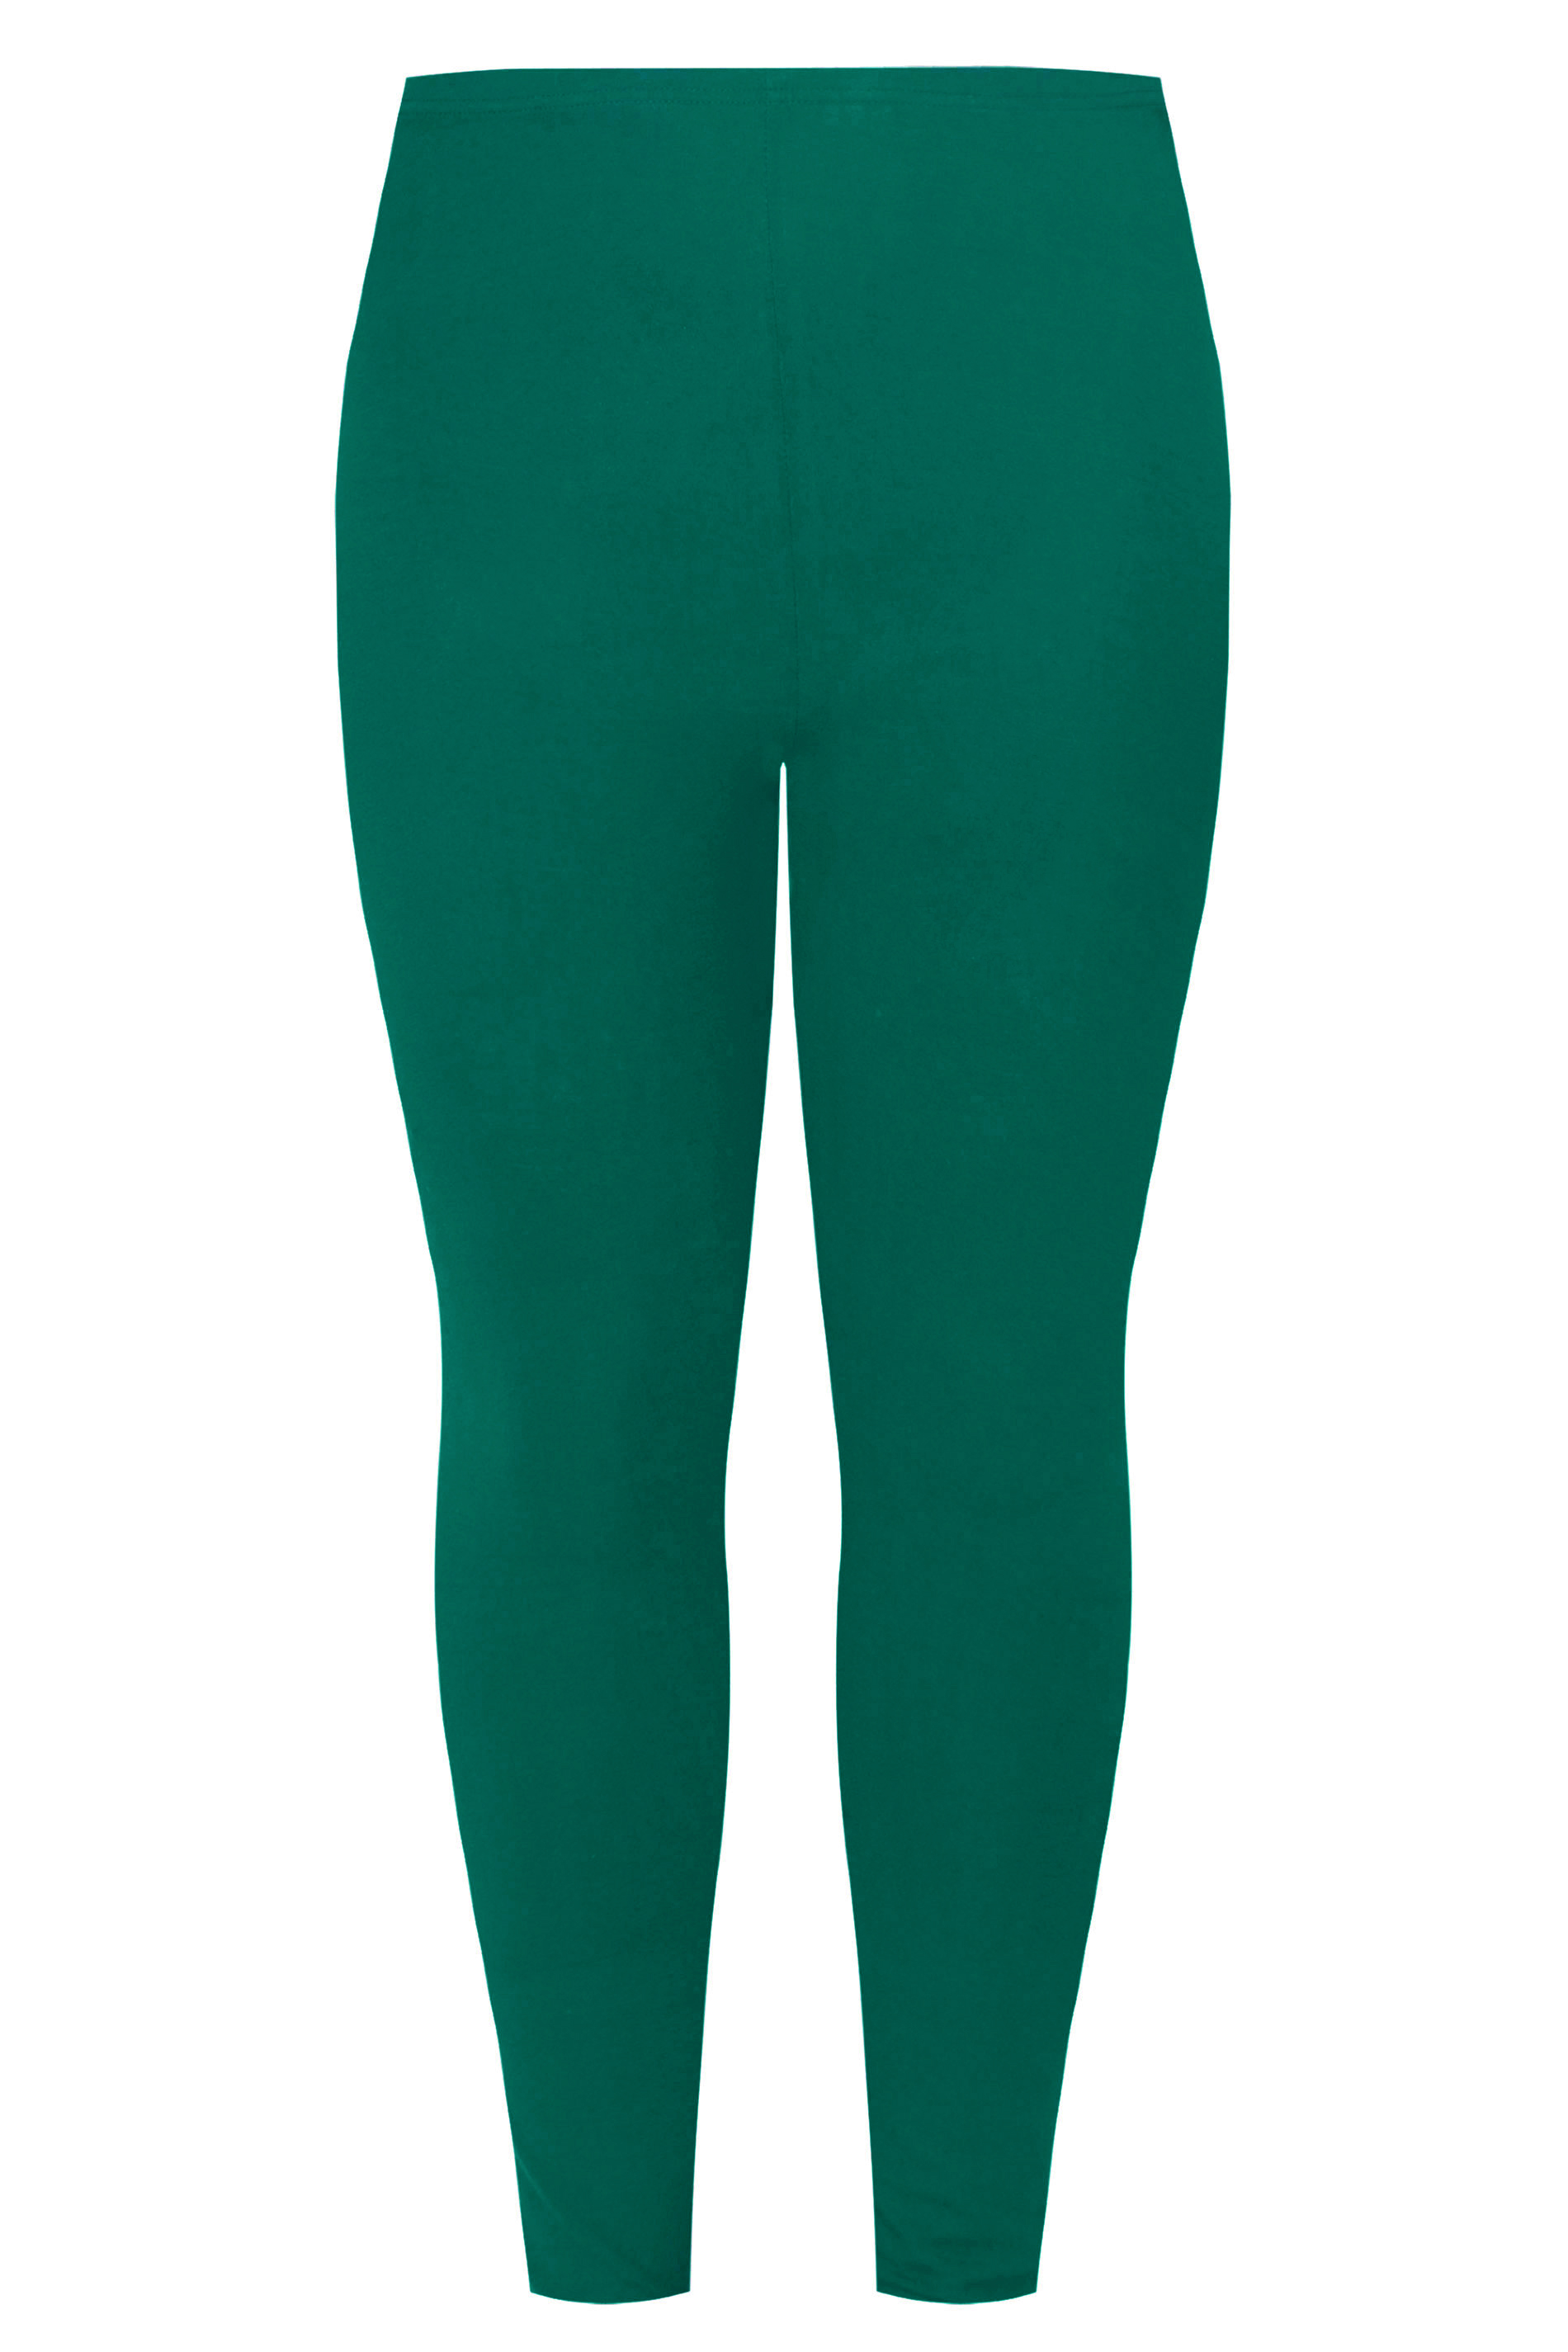 Curve Plus Size Forest Green Leggings